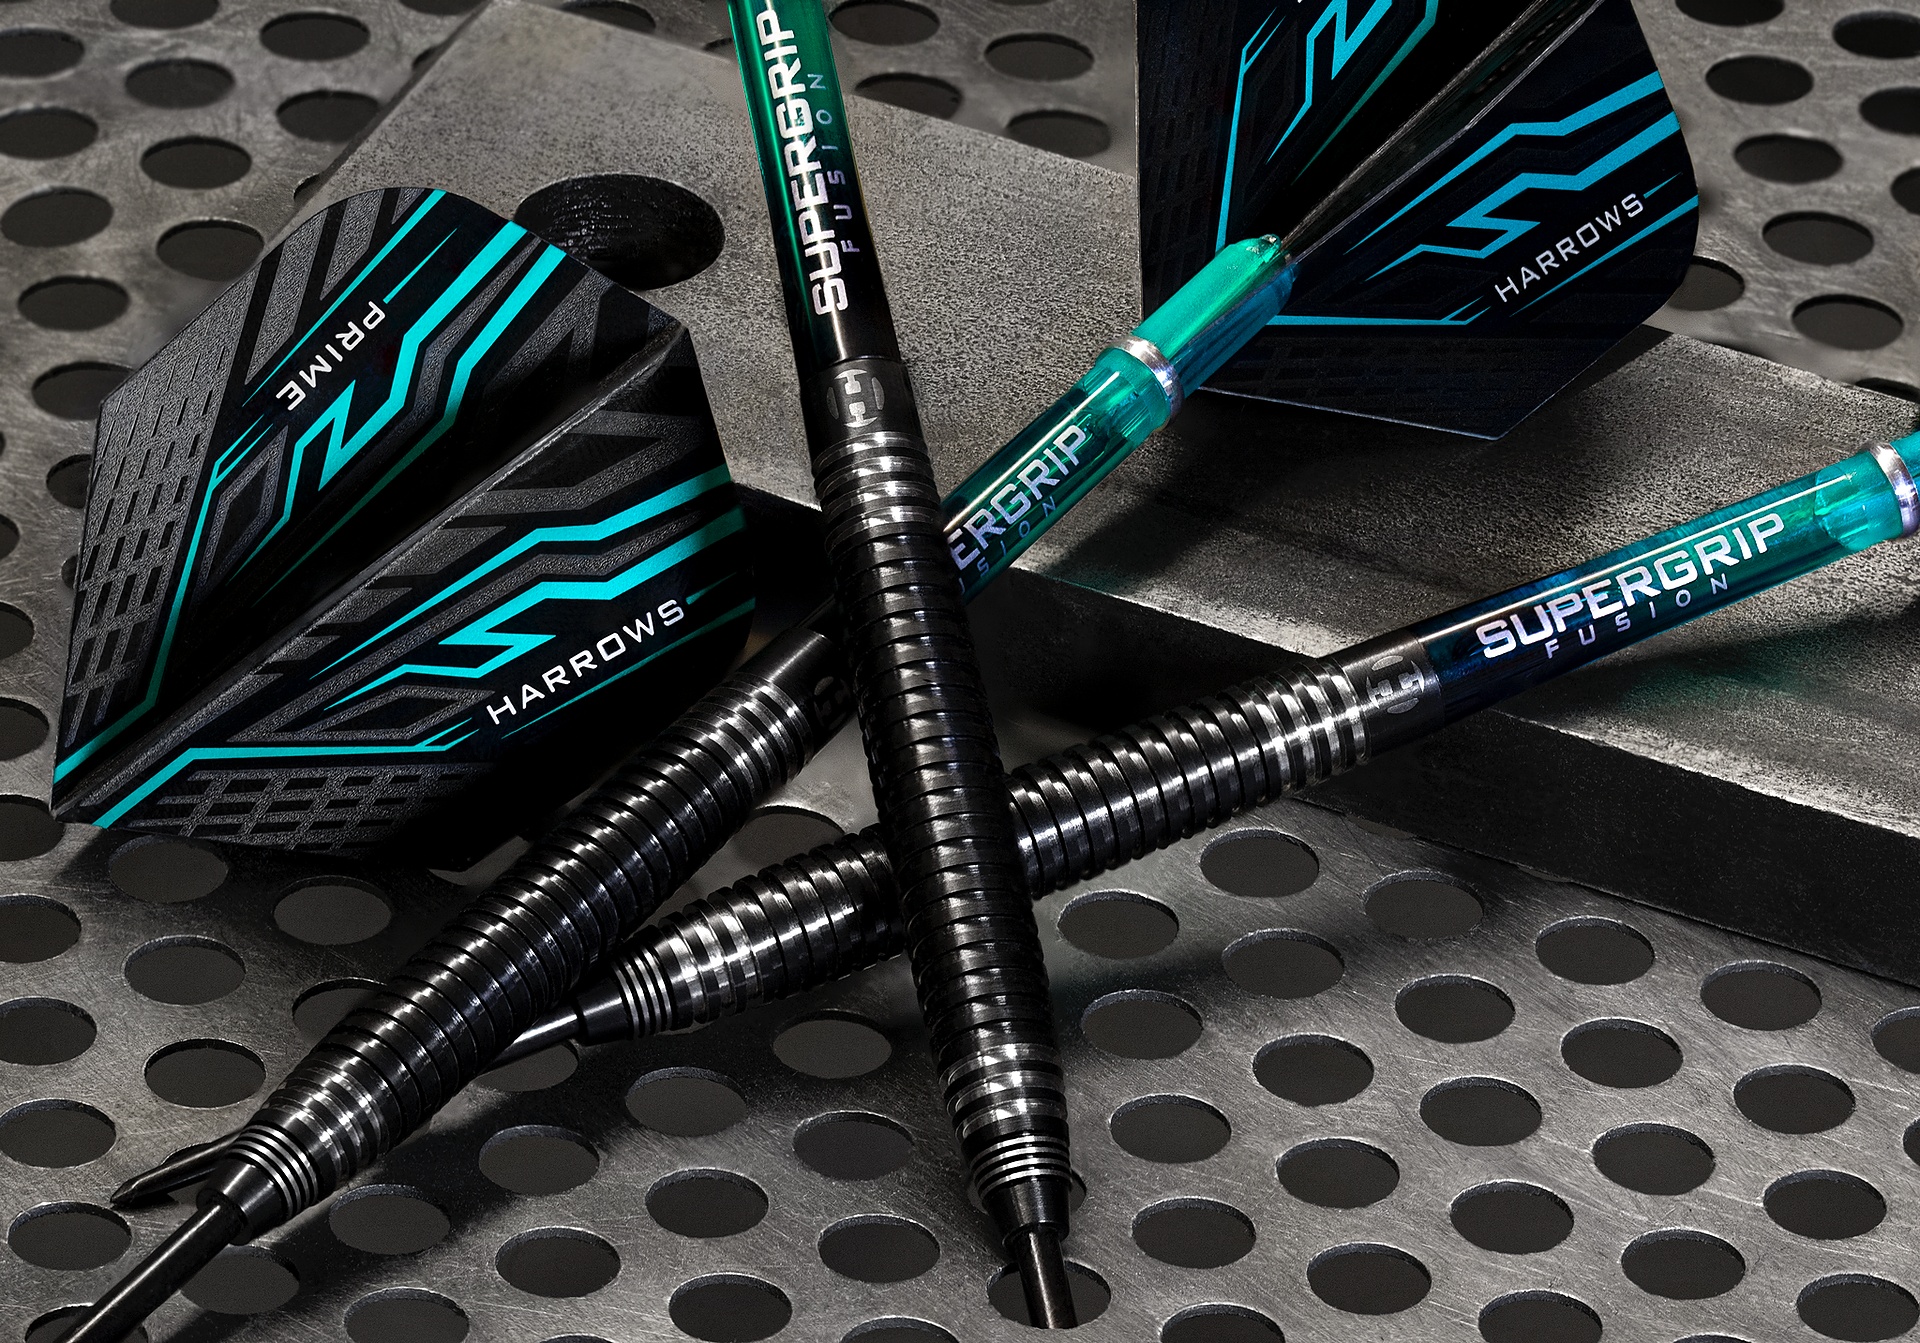 Harrows Darts on Twitter: "Oblivion 90% 🎯 Now that's a seriously good looking set of arrows right there 😍 Hands up if you agree 🙋‍♂️ #DefyLimits https://t.co/erqP8J6fDO" Twitter